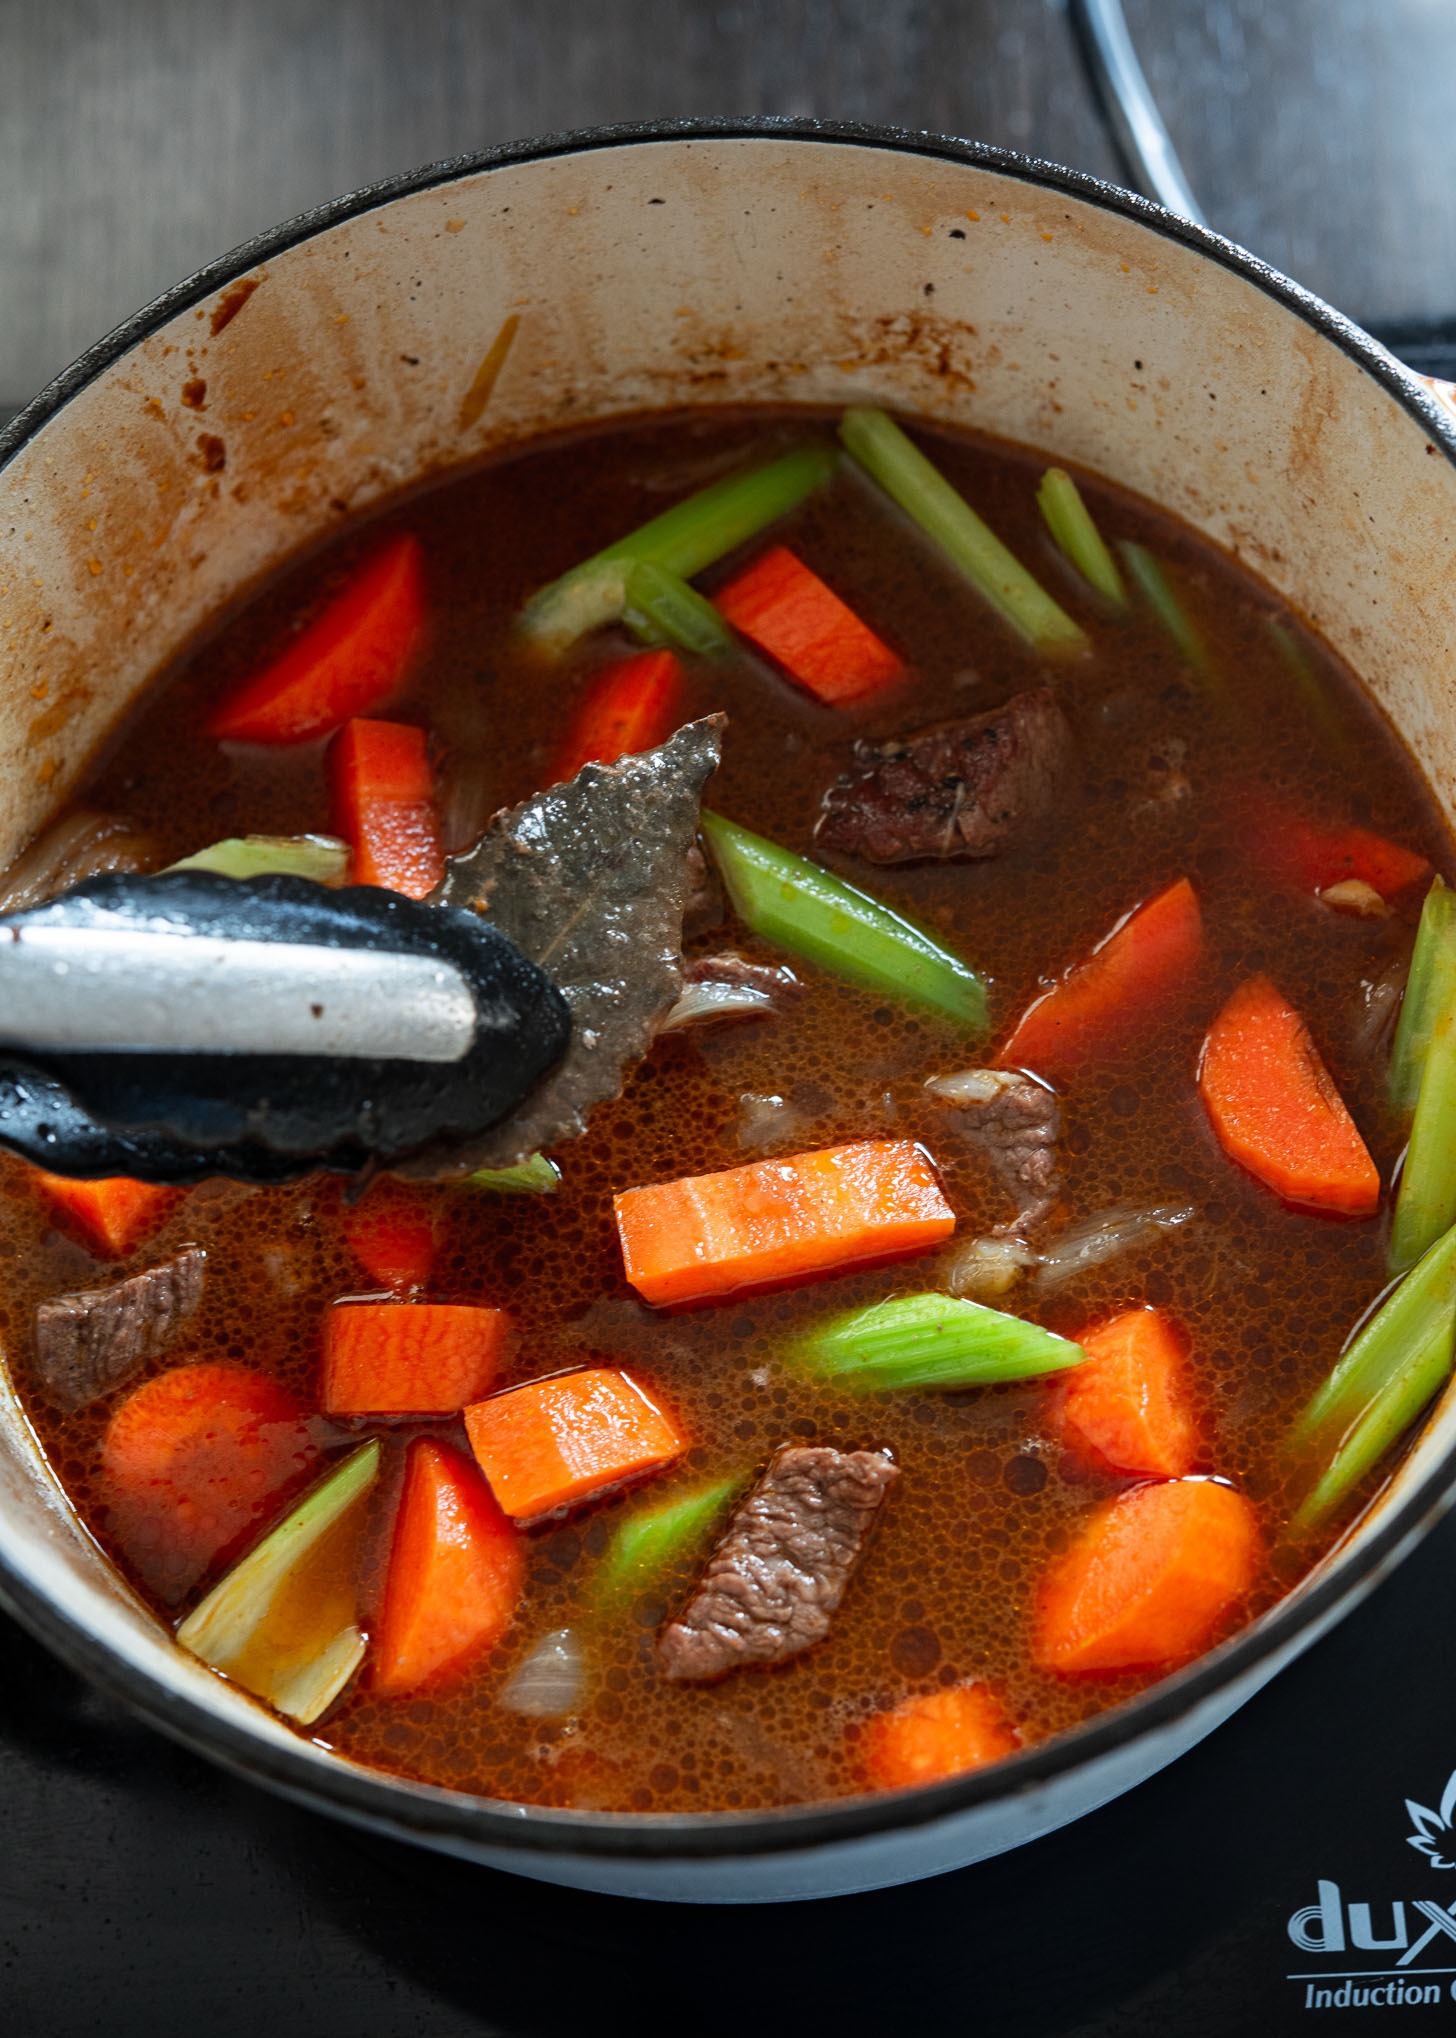 Removing a bay leaf and adding vegetables to the stew.